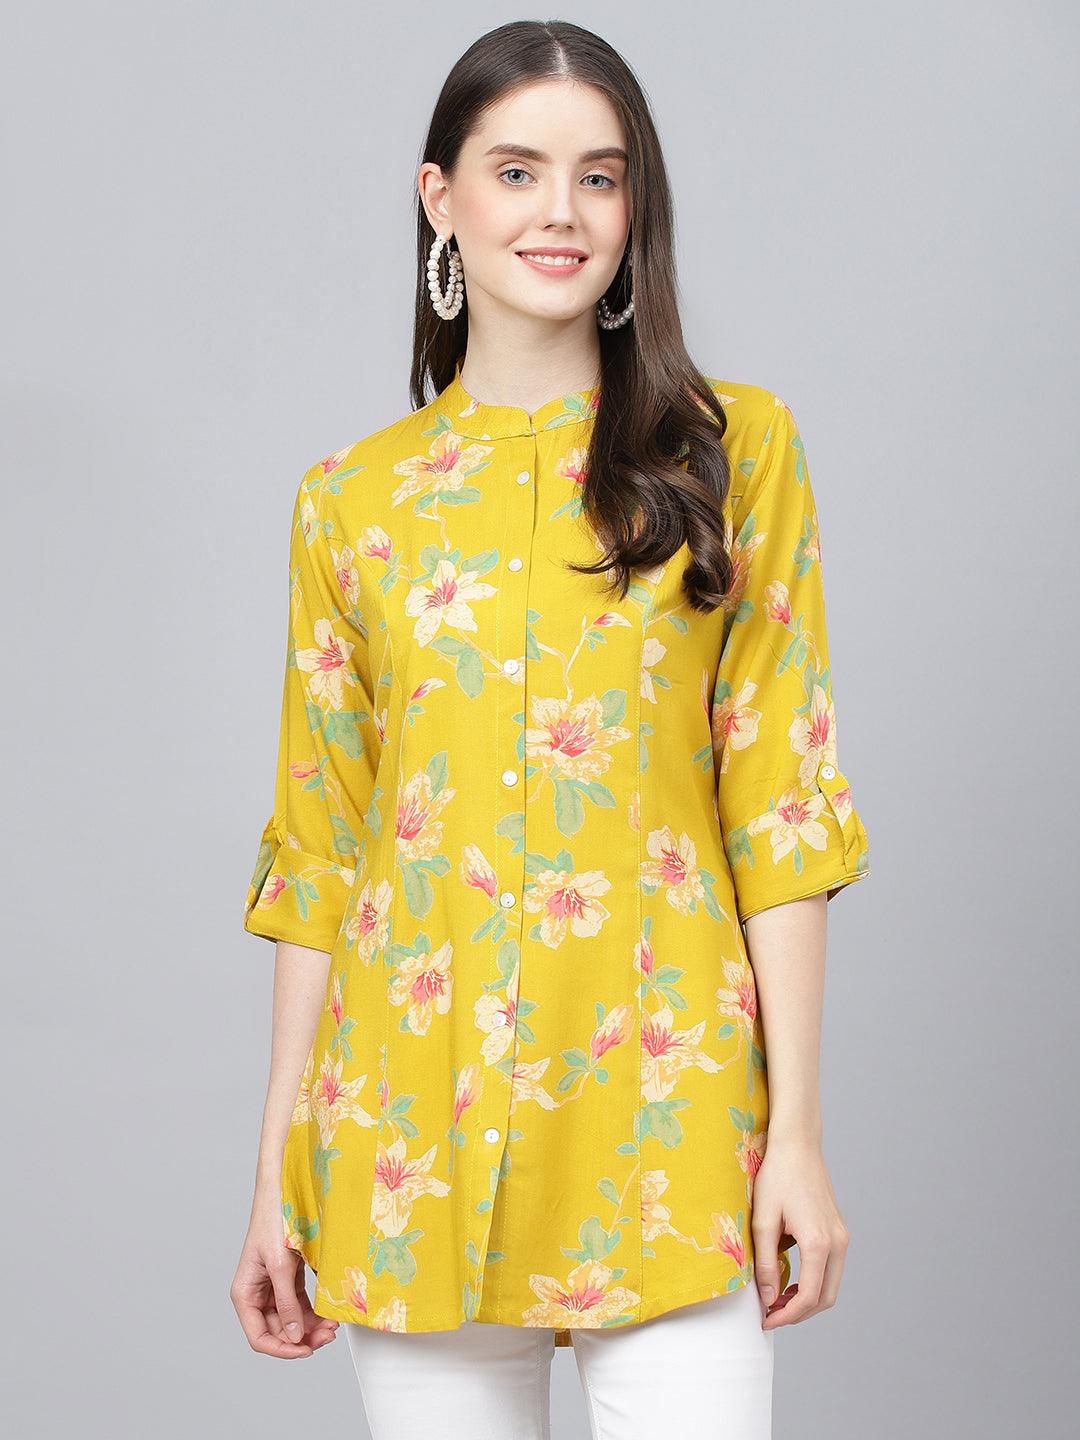 Divena Yellow Floral printed Rayon A-line Shirts Style Top - divena world